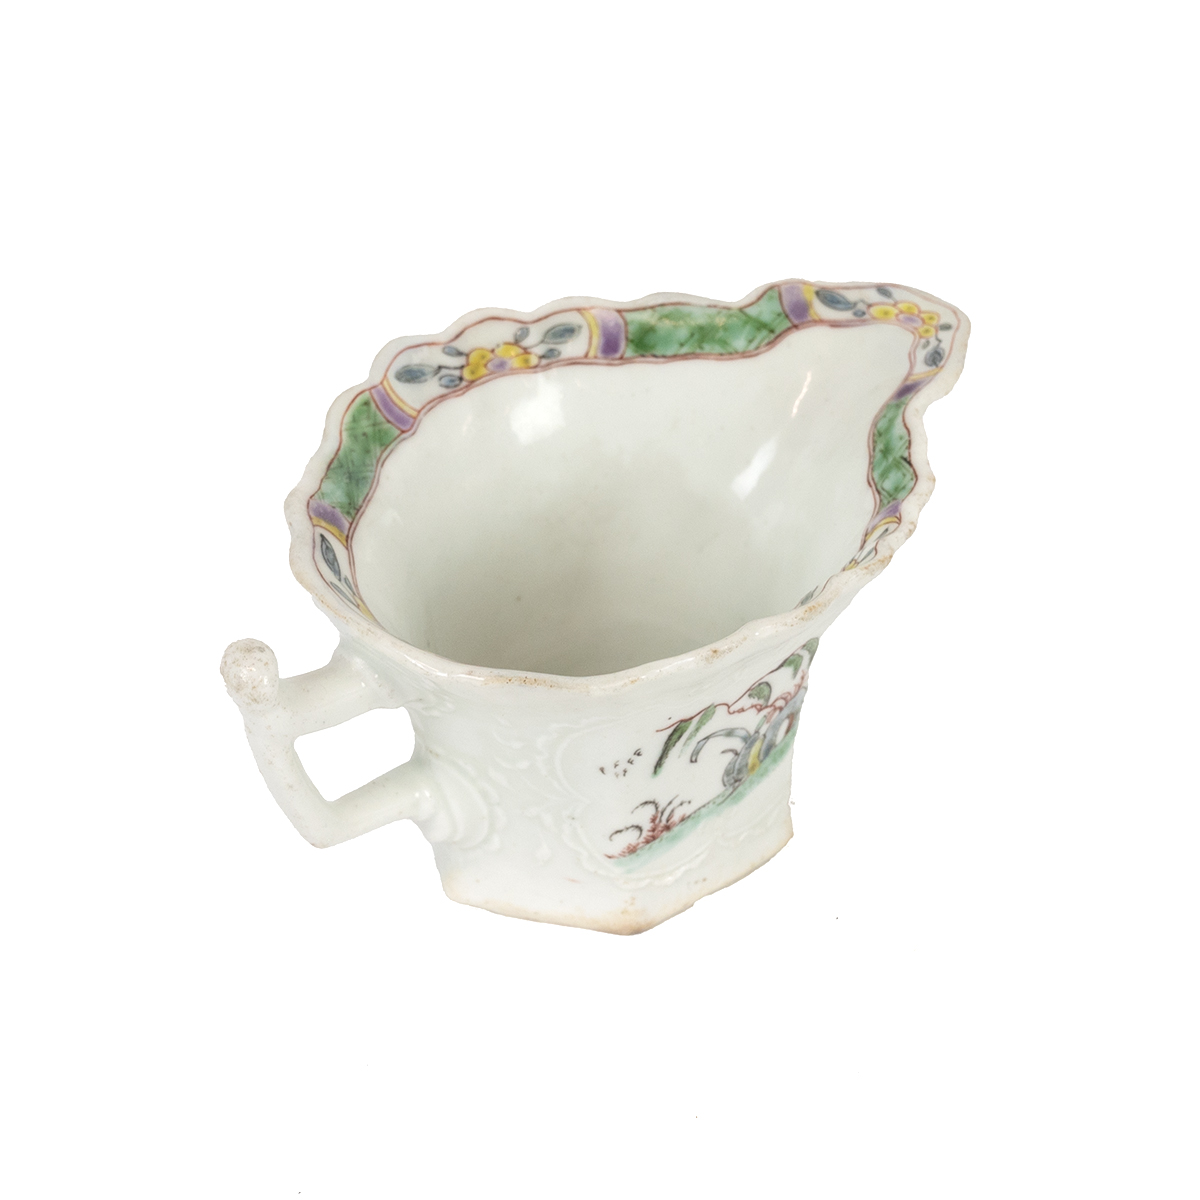 Worcester - First or Dr Wall Period hexagonal "Wigornia" form cream jug, circa 1760, with hand pa... - Image 2 of 4